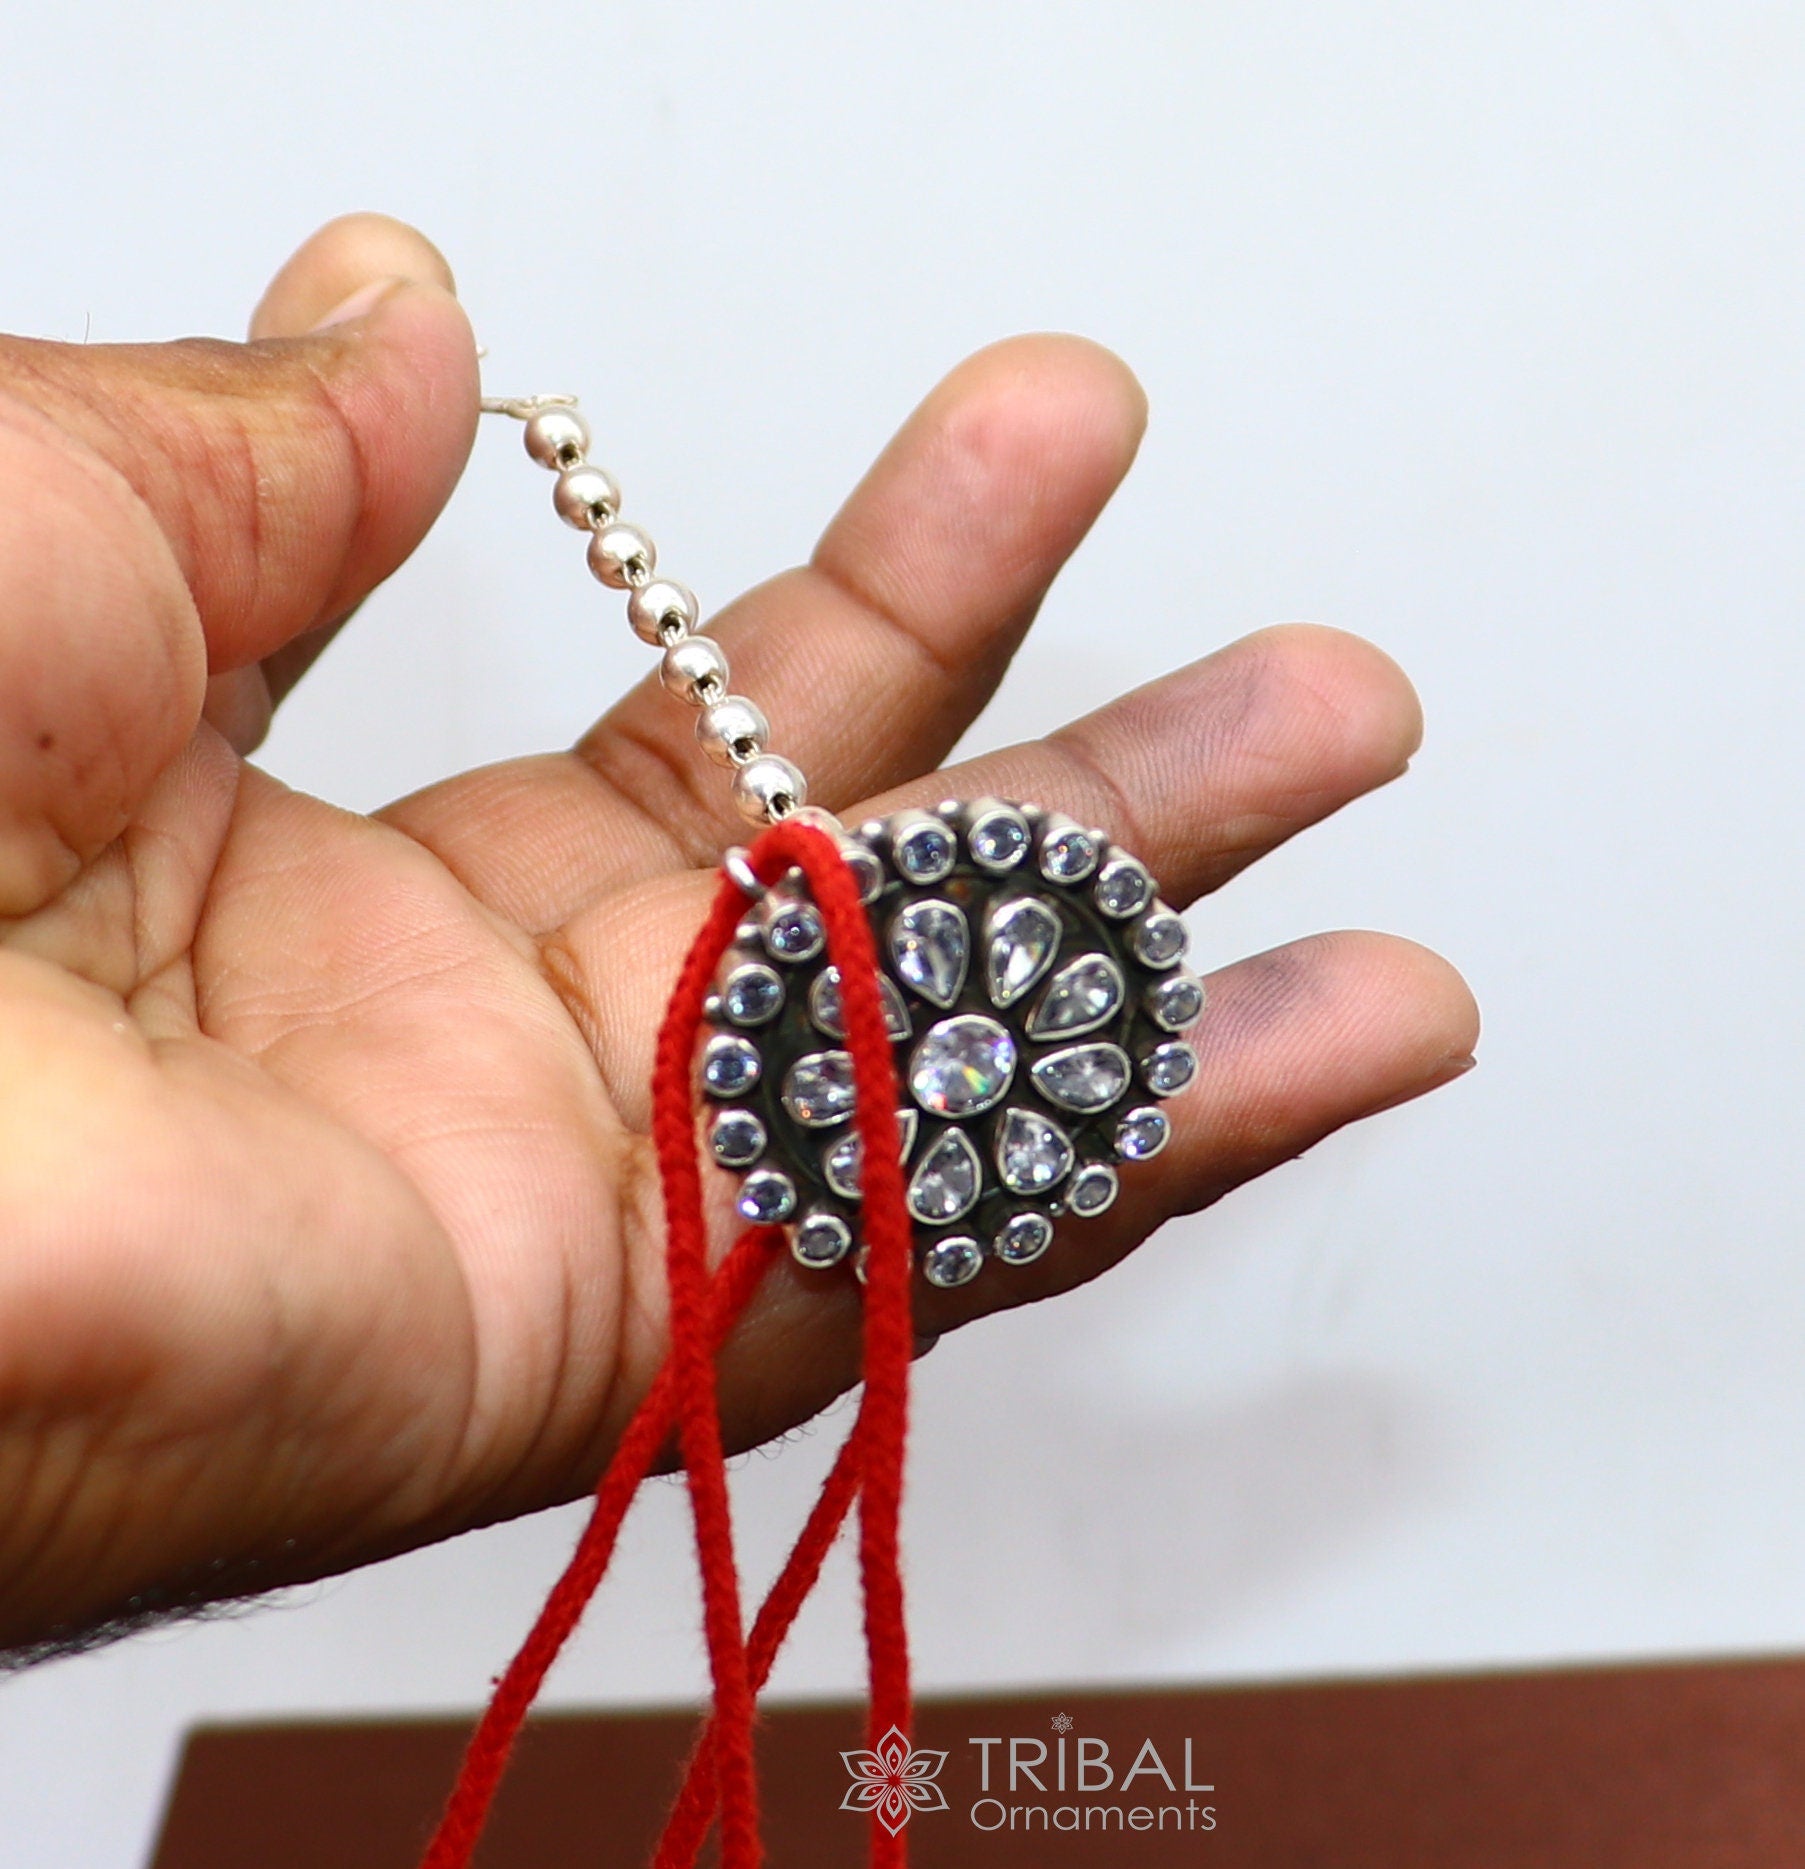 Indian traditional cultural vintage style mangtika amazing hair jewellery head jewelry 925 sterling silver tika ethnic tribal jewelry mt21 - TRIBAL ORNAMENTS